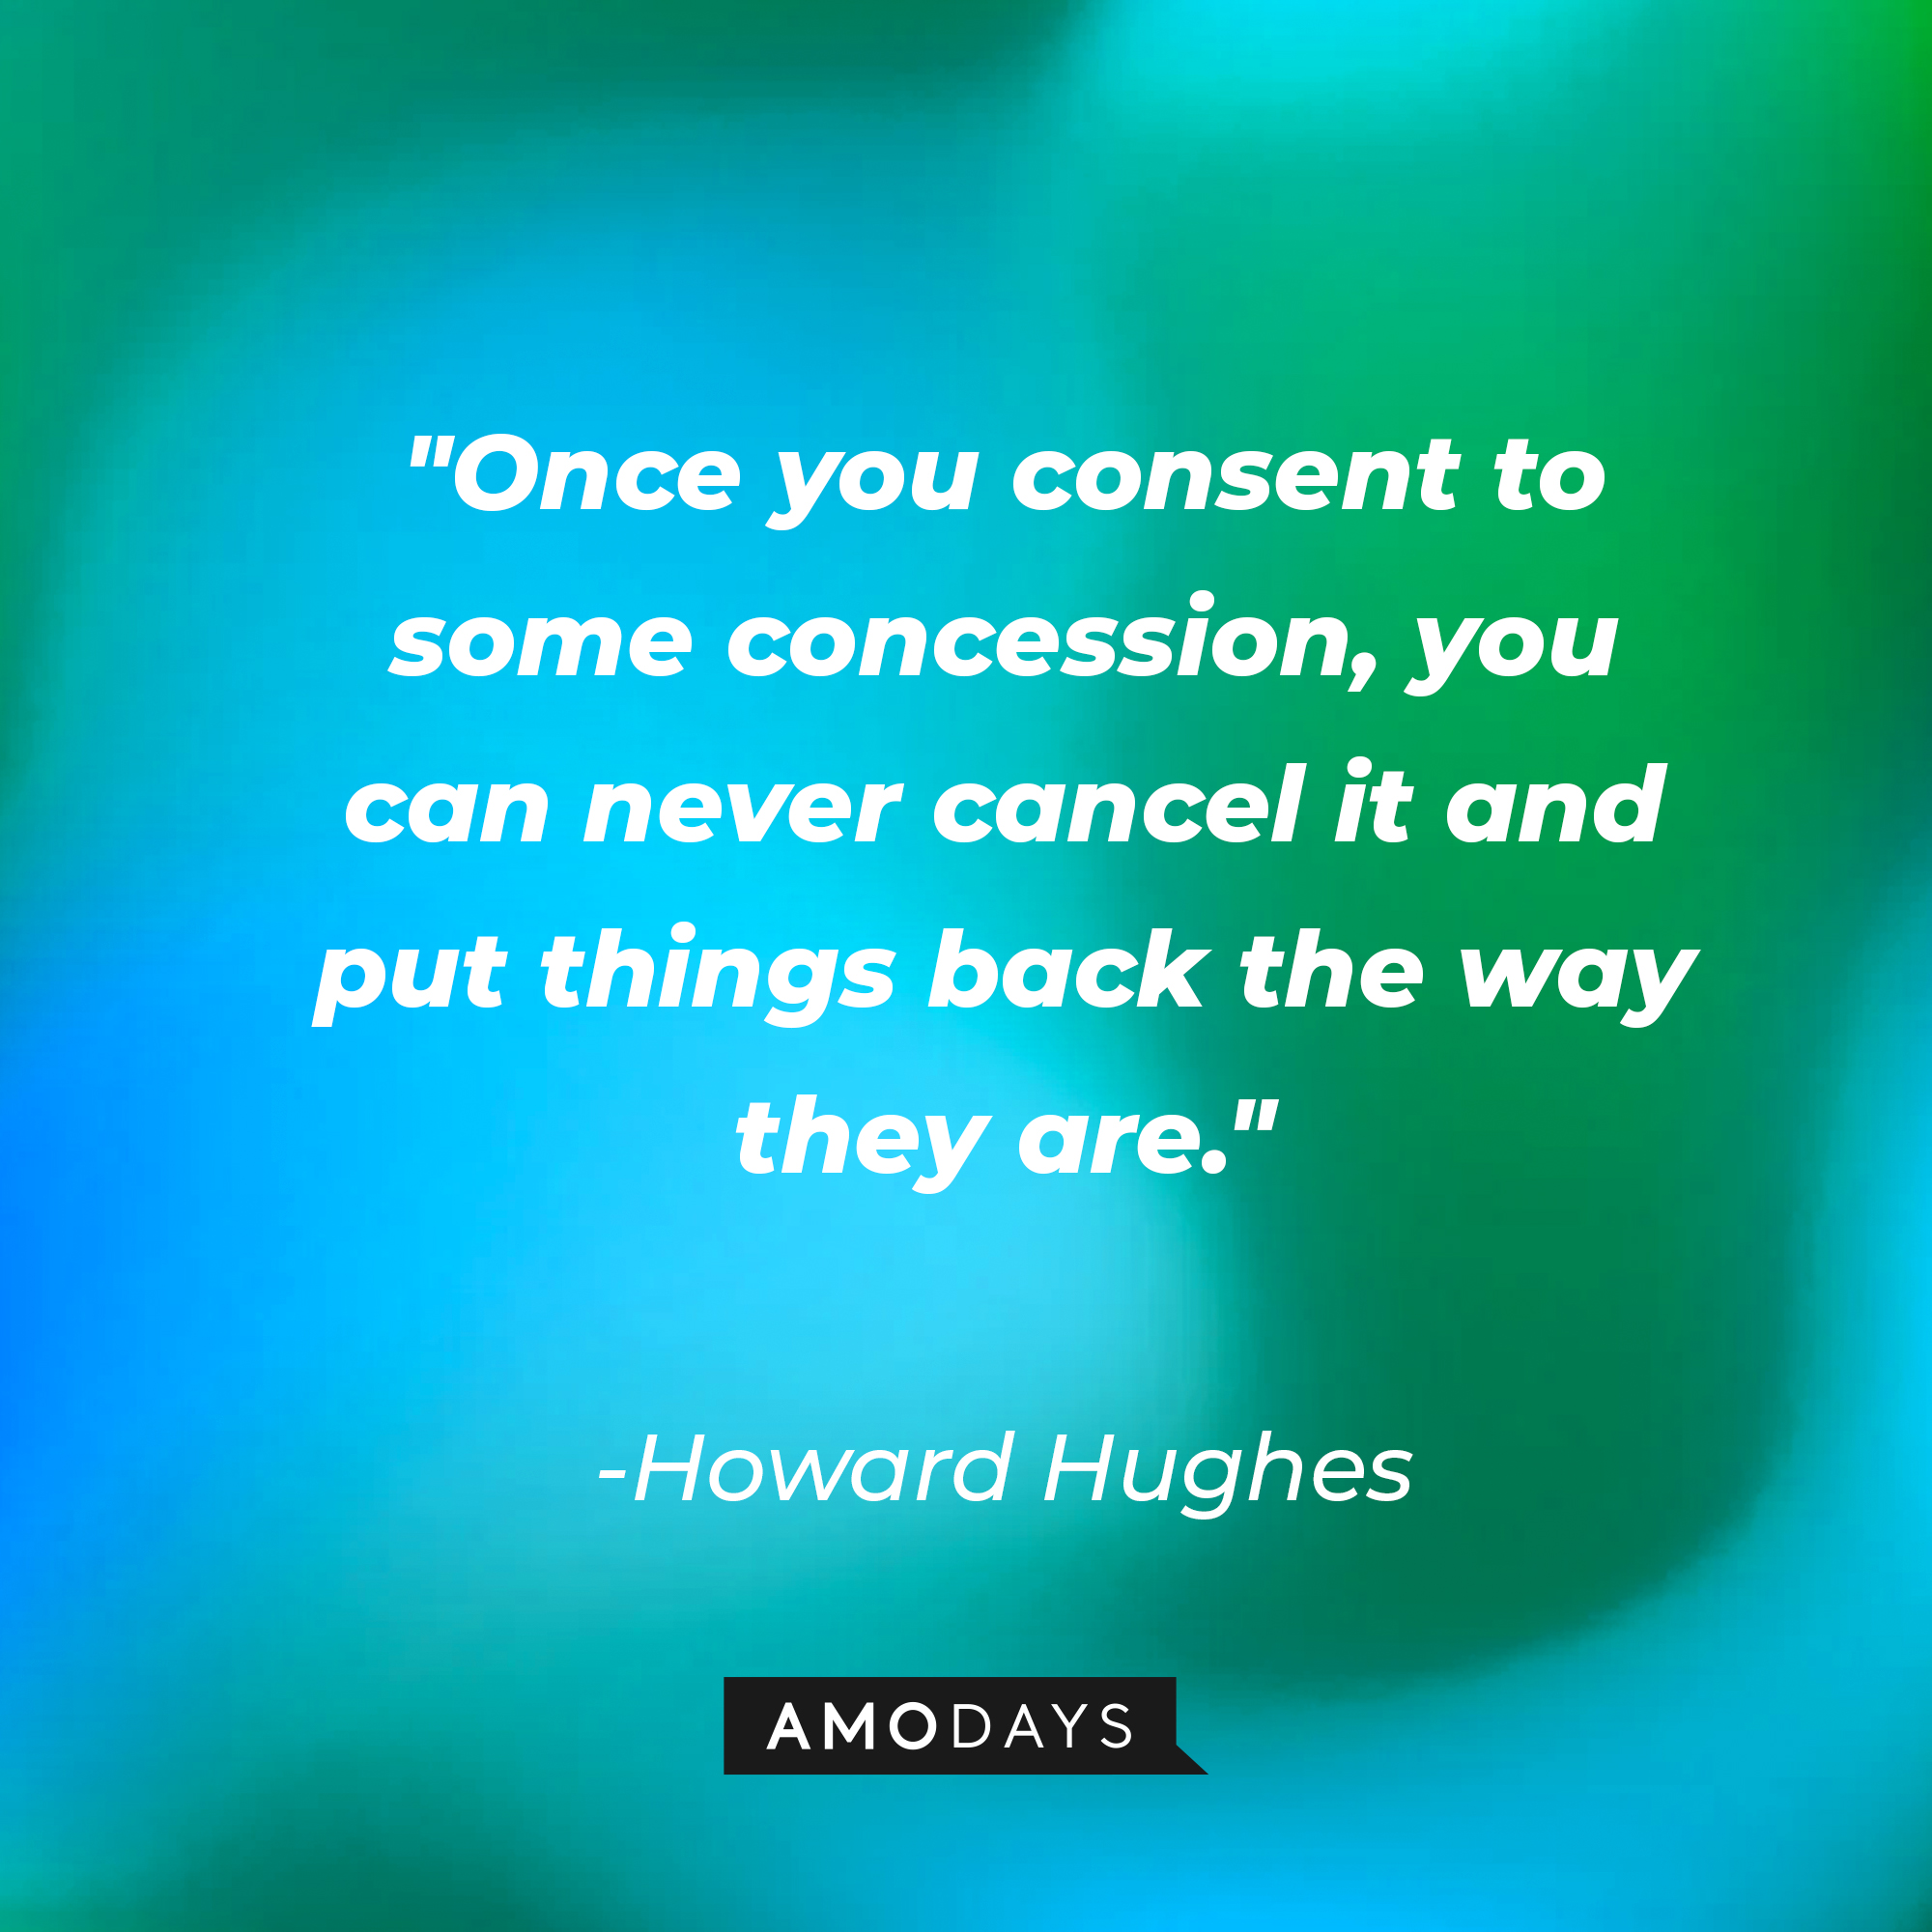 Howard Hughes' quote: "Once you consent to some concession, you can never cancel it and put things back the way they are." | Source: AmoDays